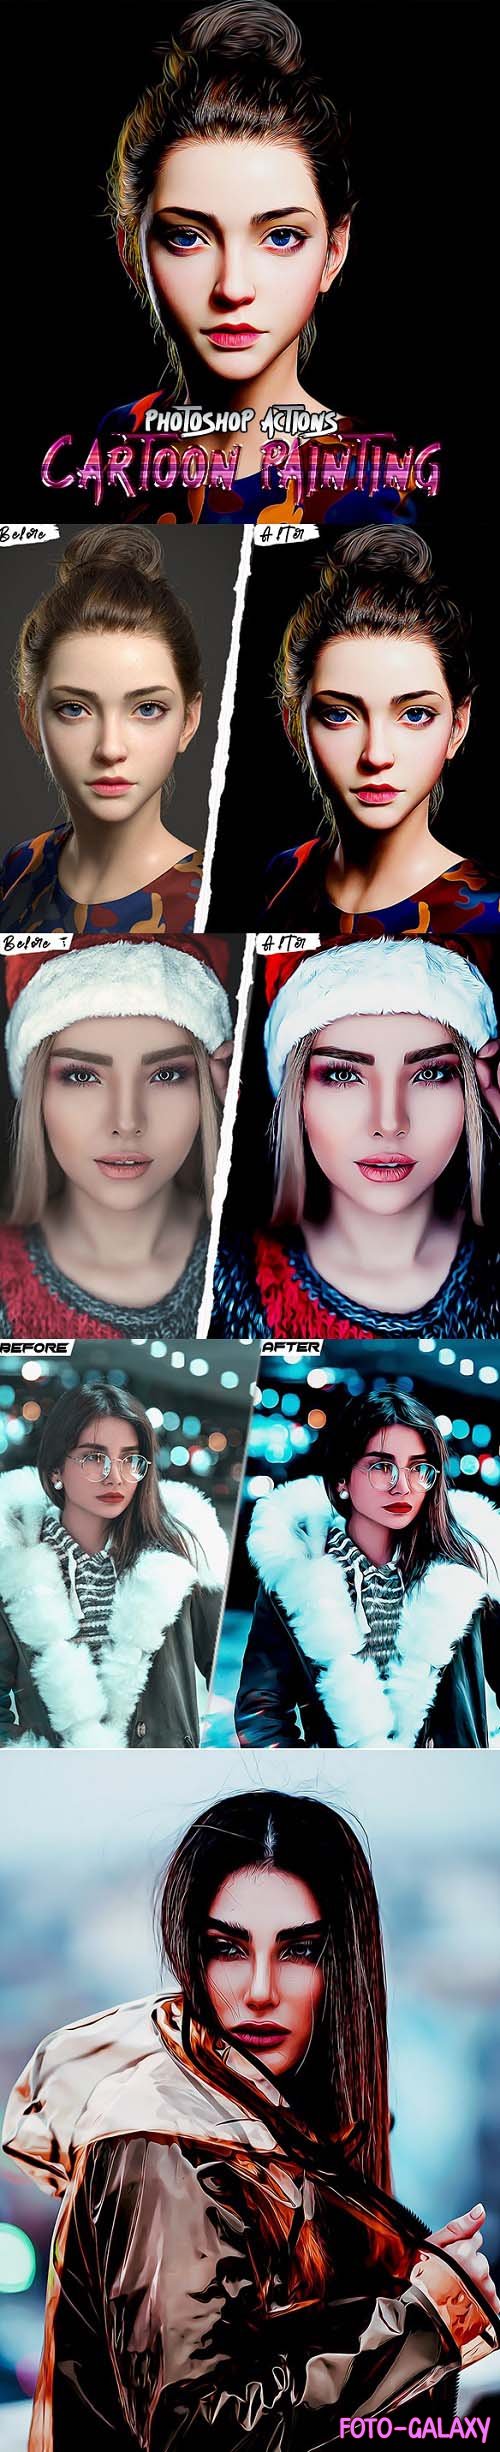 Cartoon Painting - Christmas Photoshop Actions - 35139694